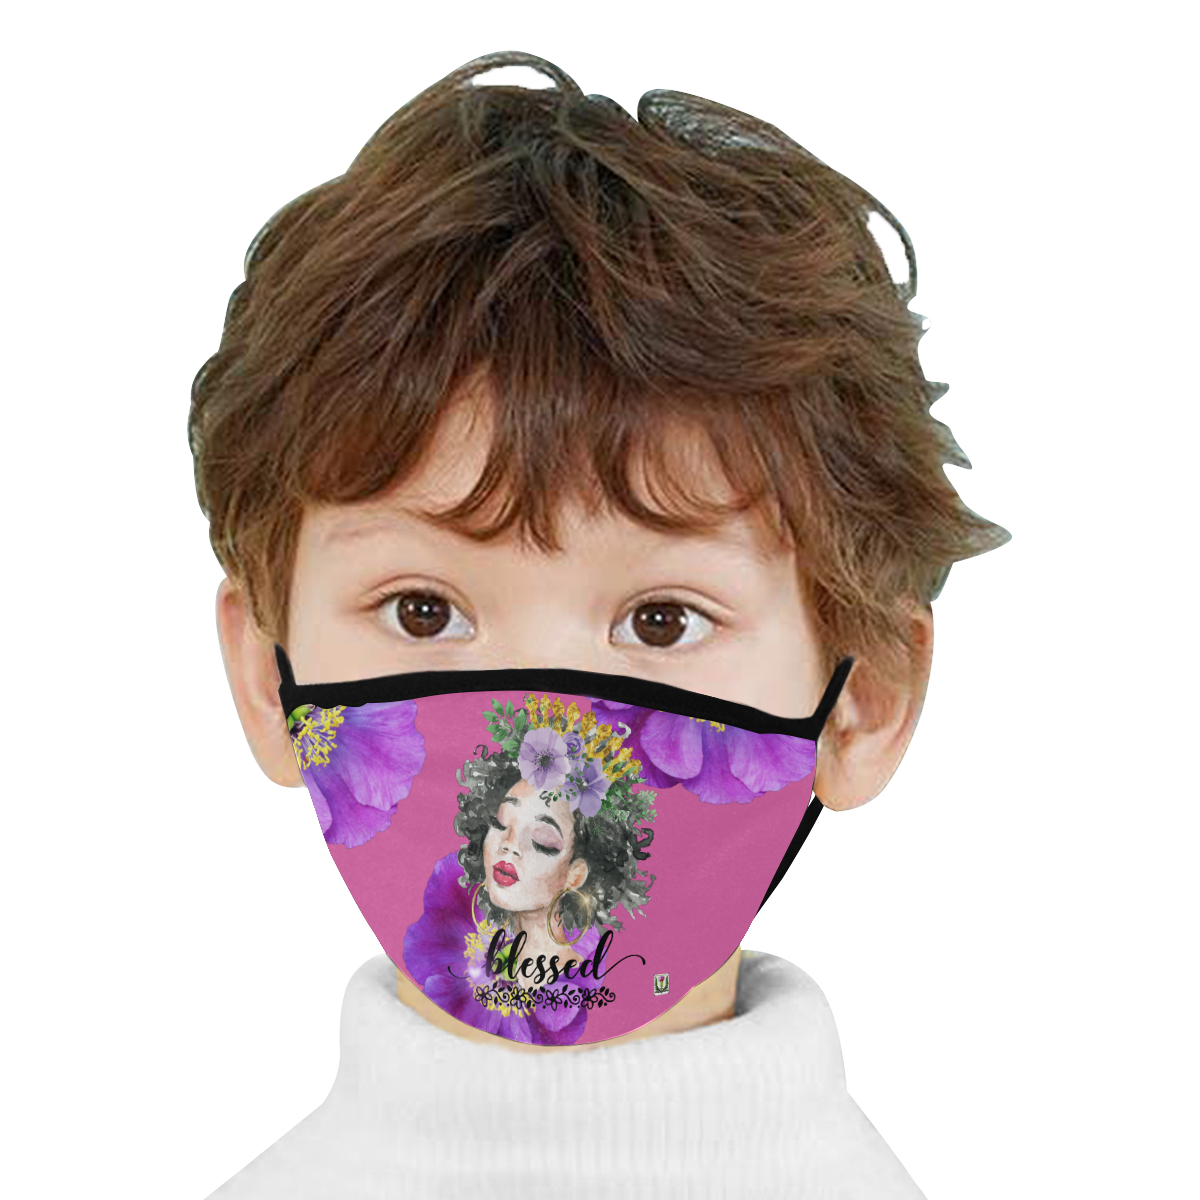 Fairlings Delight's The Word Collection- Blessed 53086a9 Mouth Mask